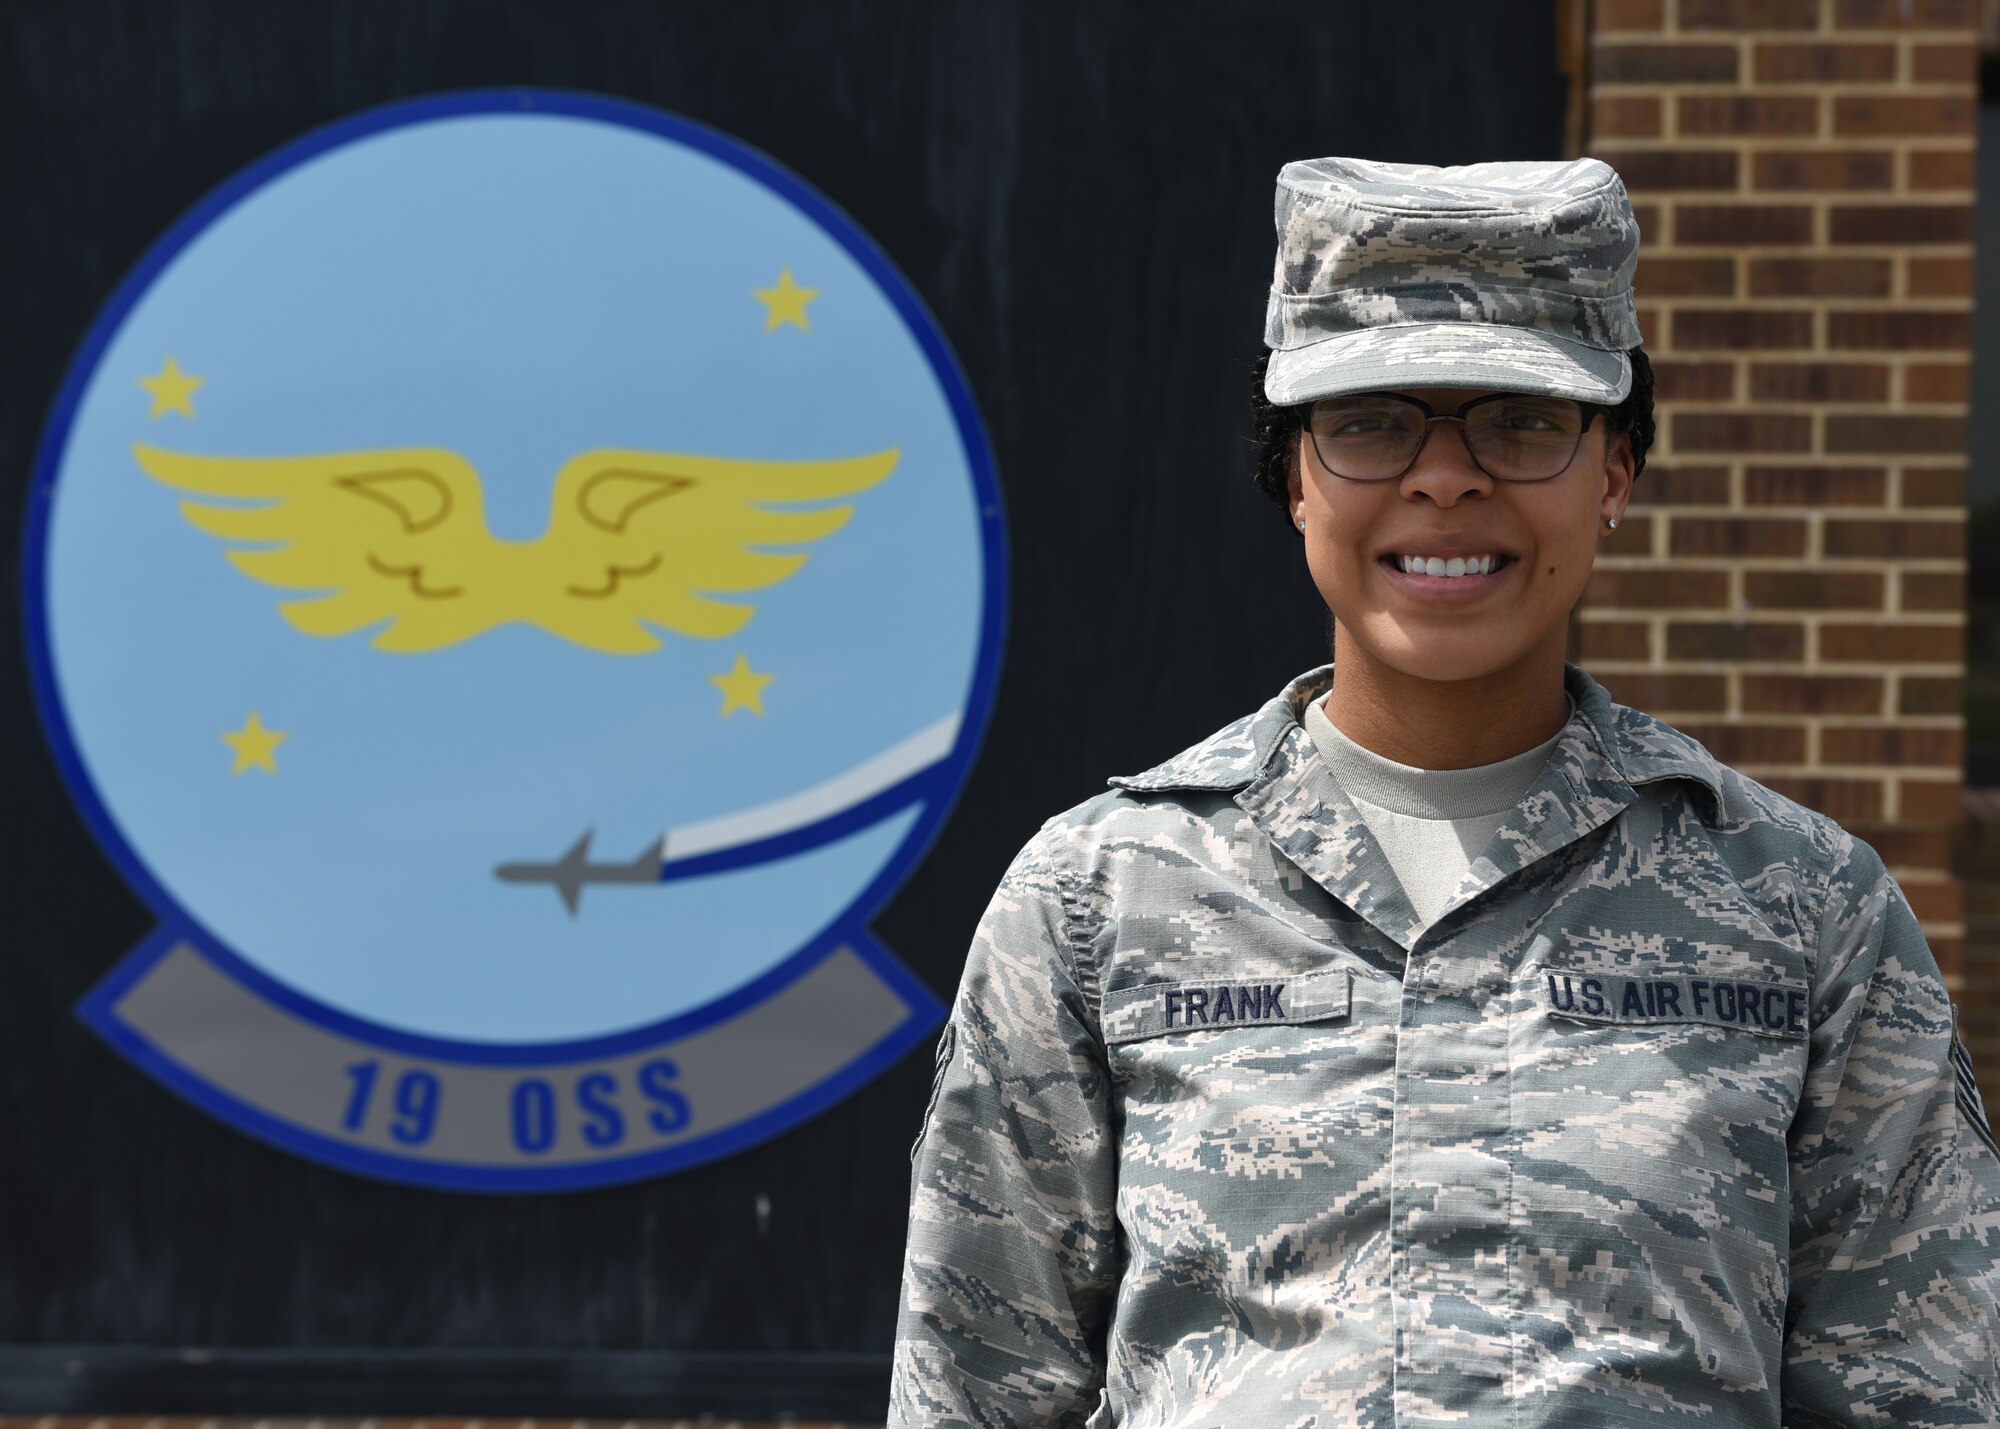 A female in uniform stands outside in front of a blue emblem with the words 19 OSS.